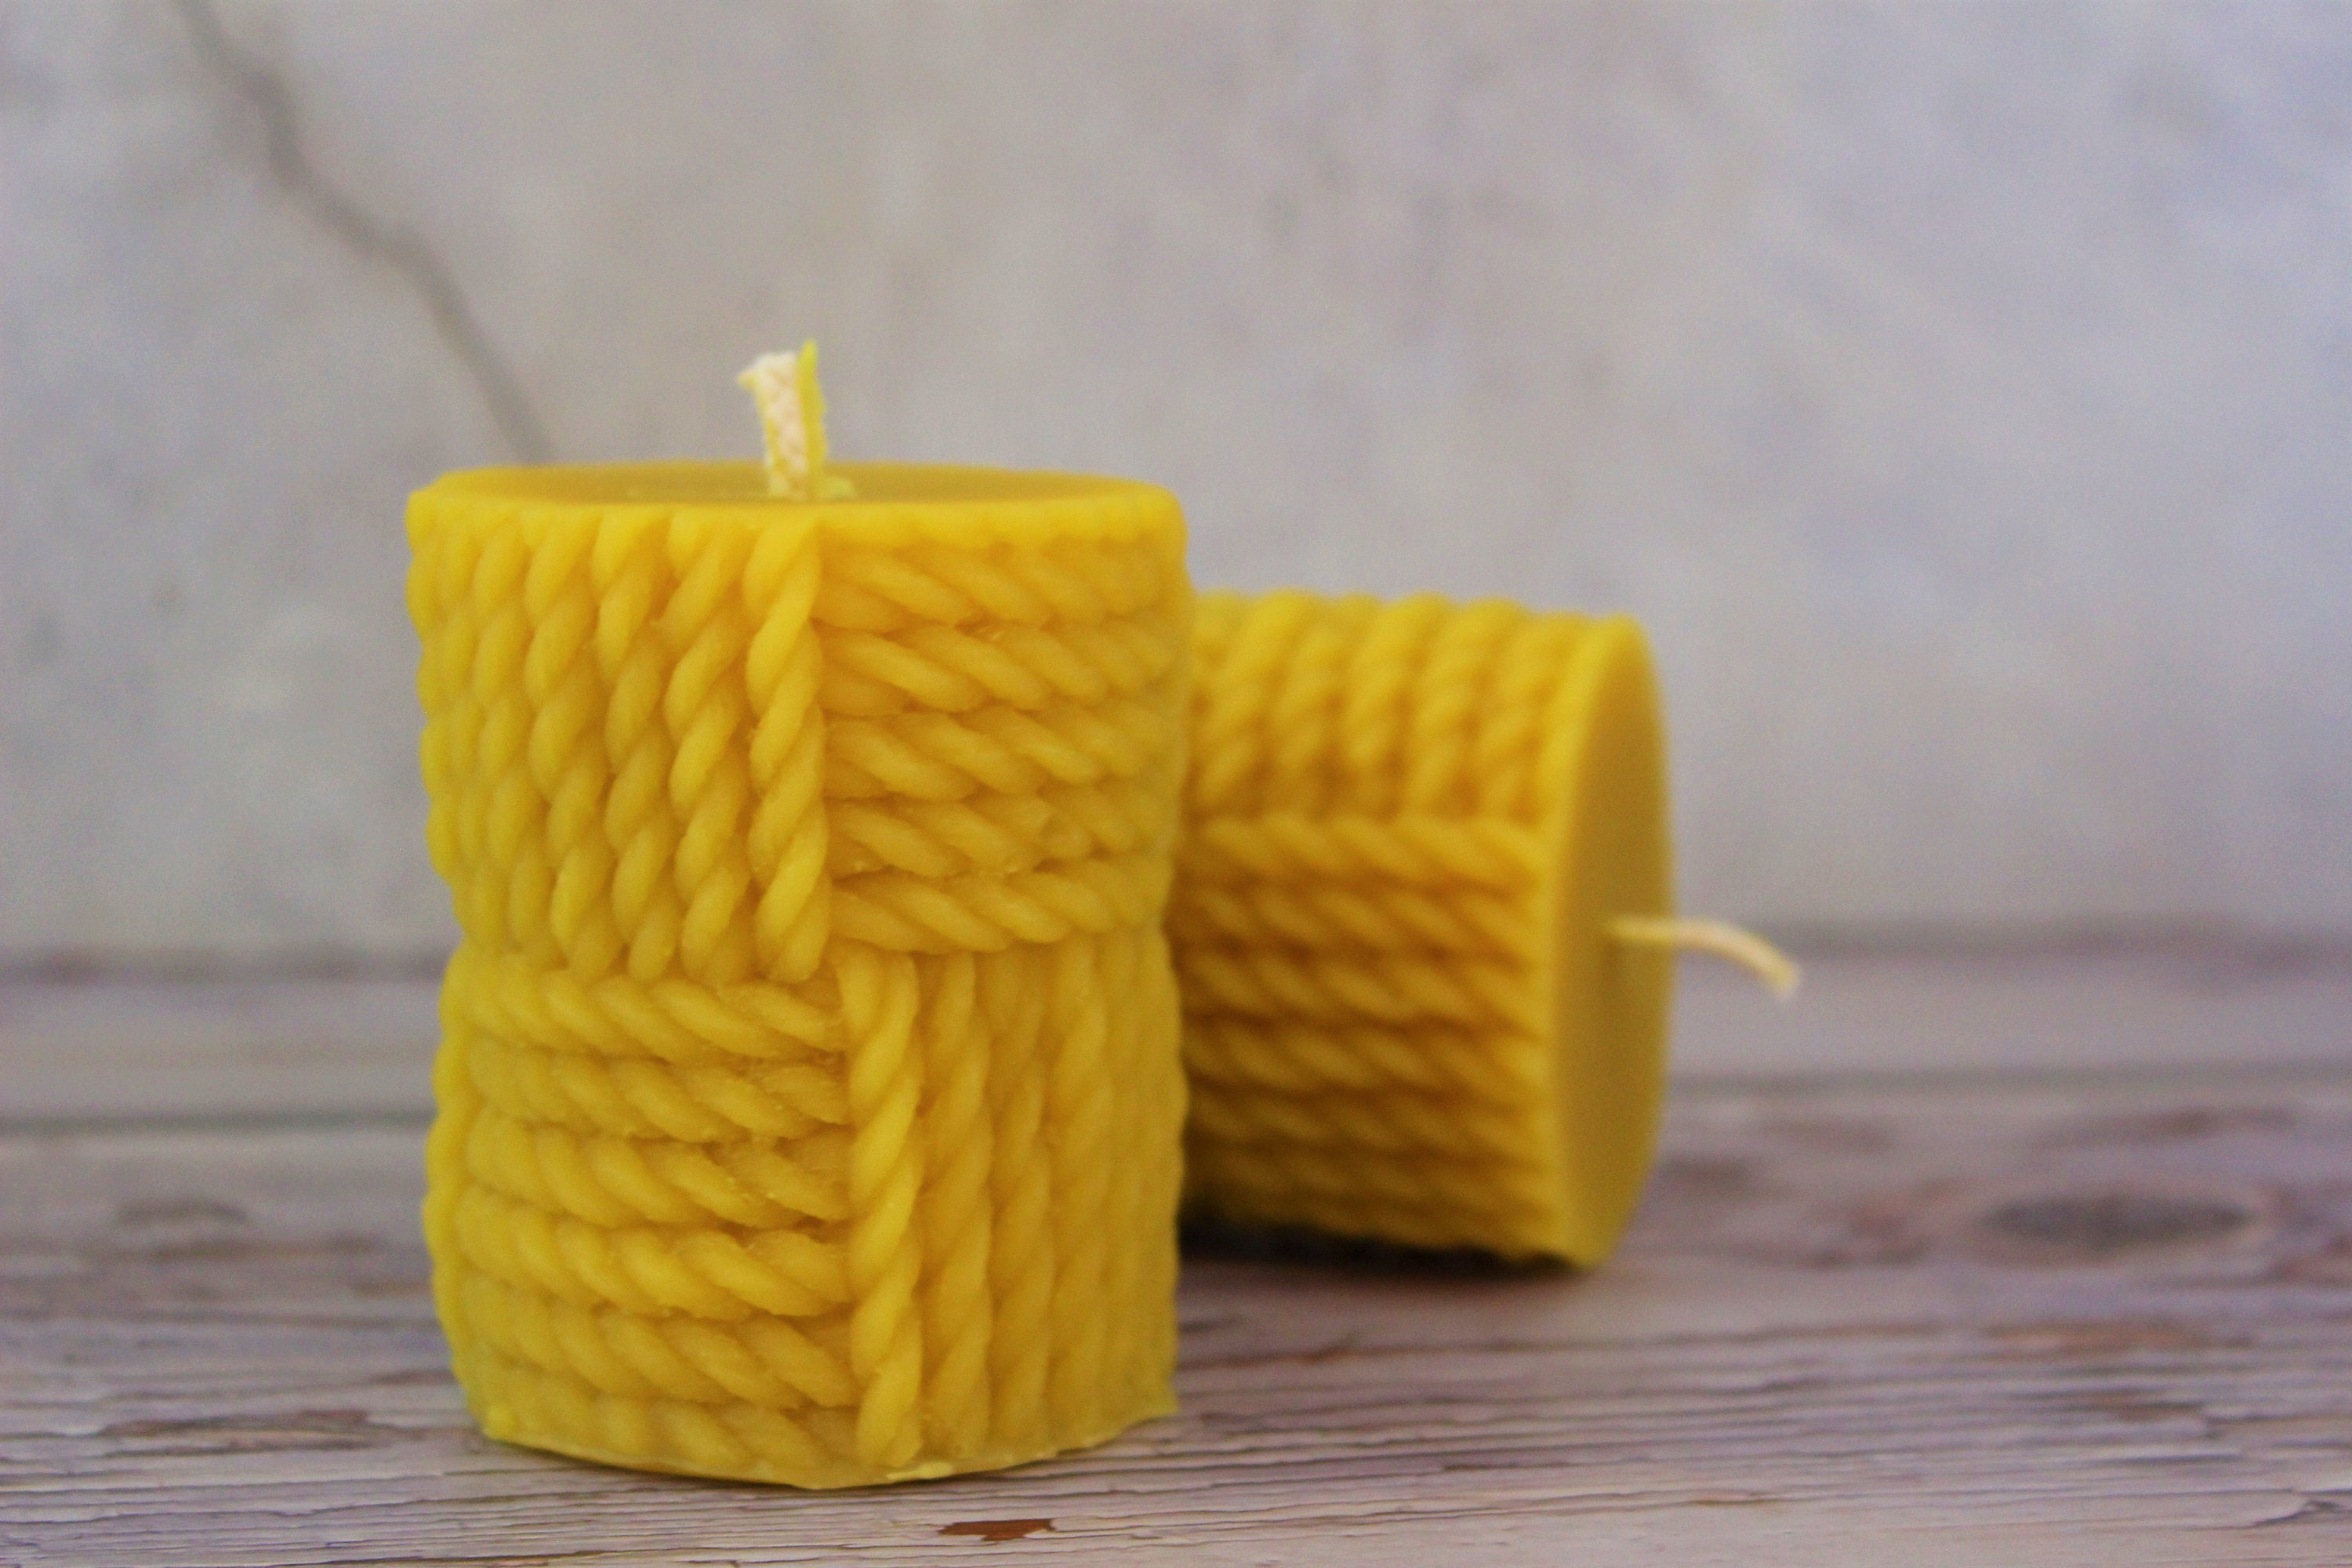 Pure Beeswax Spiral Twist Taper Candles Organic - 8 Tall, Hand